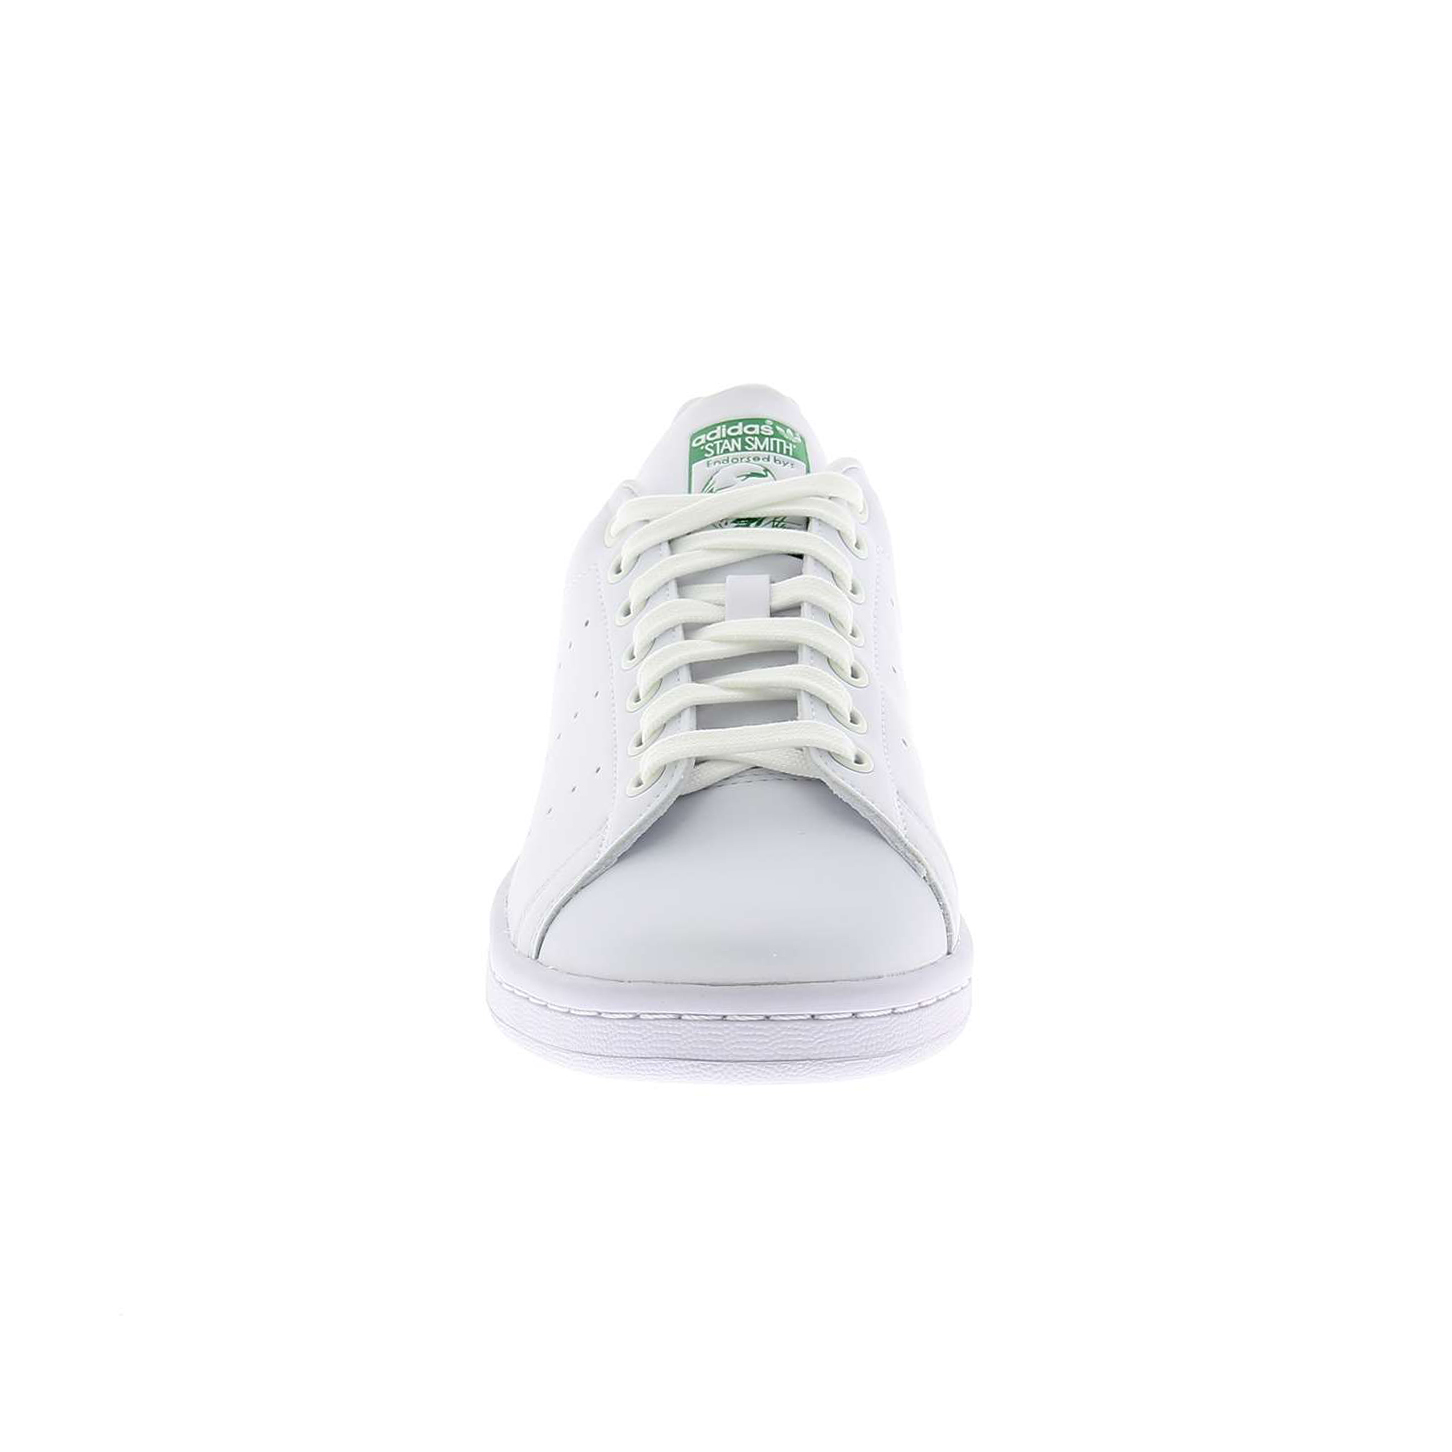 03 - STAN SMITH - ADIDAS - Baskets - Synthétique